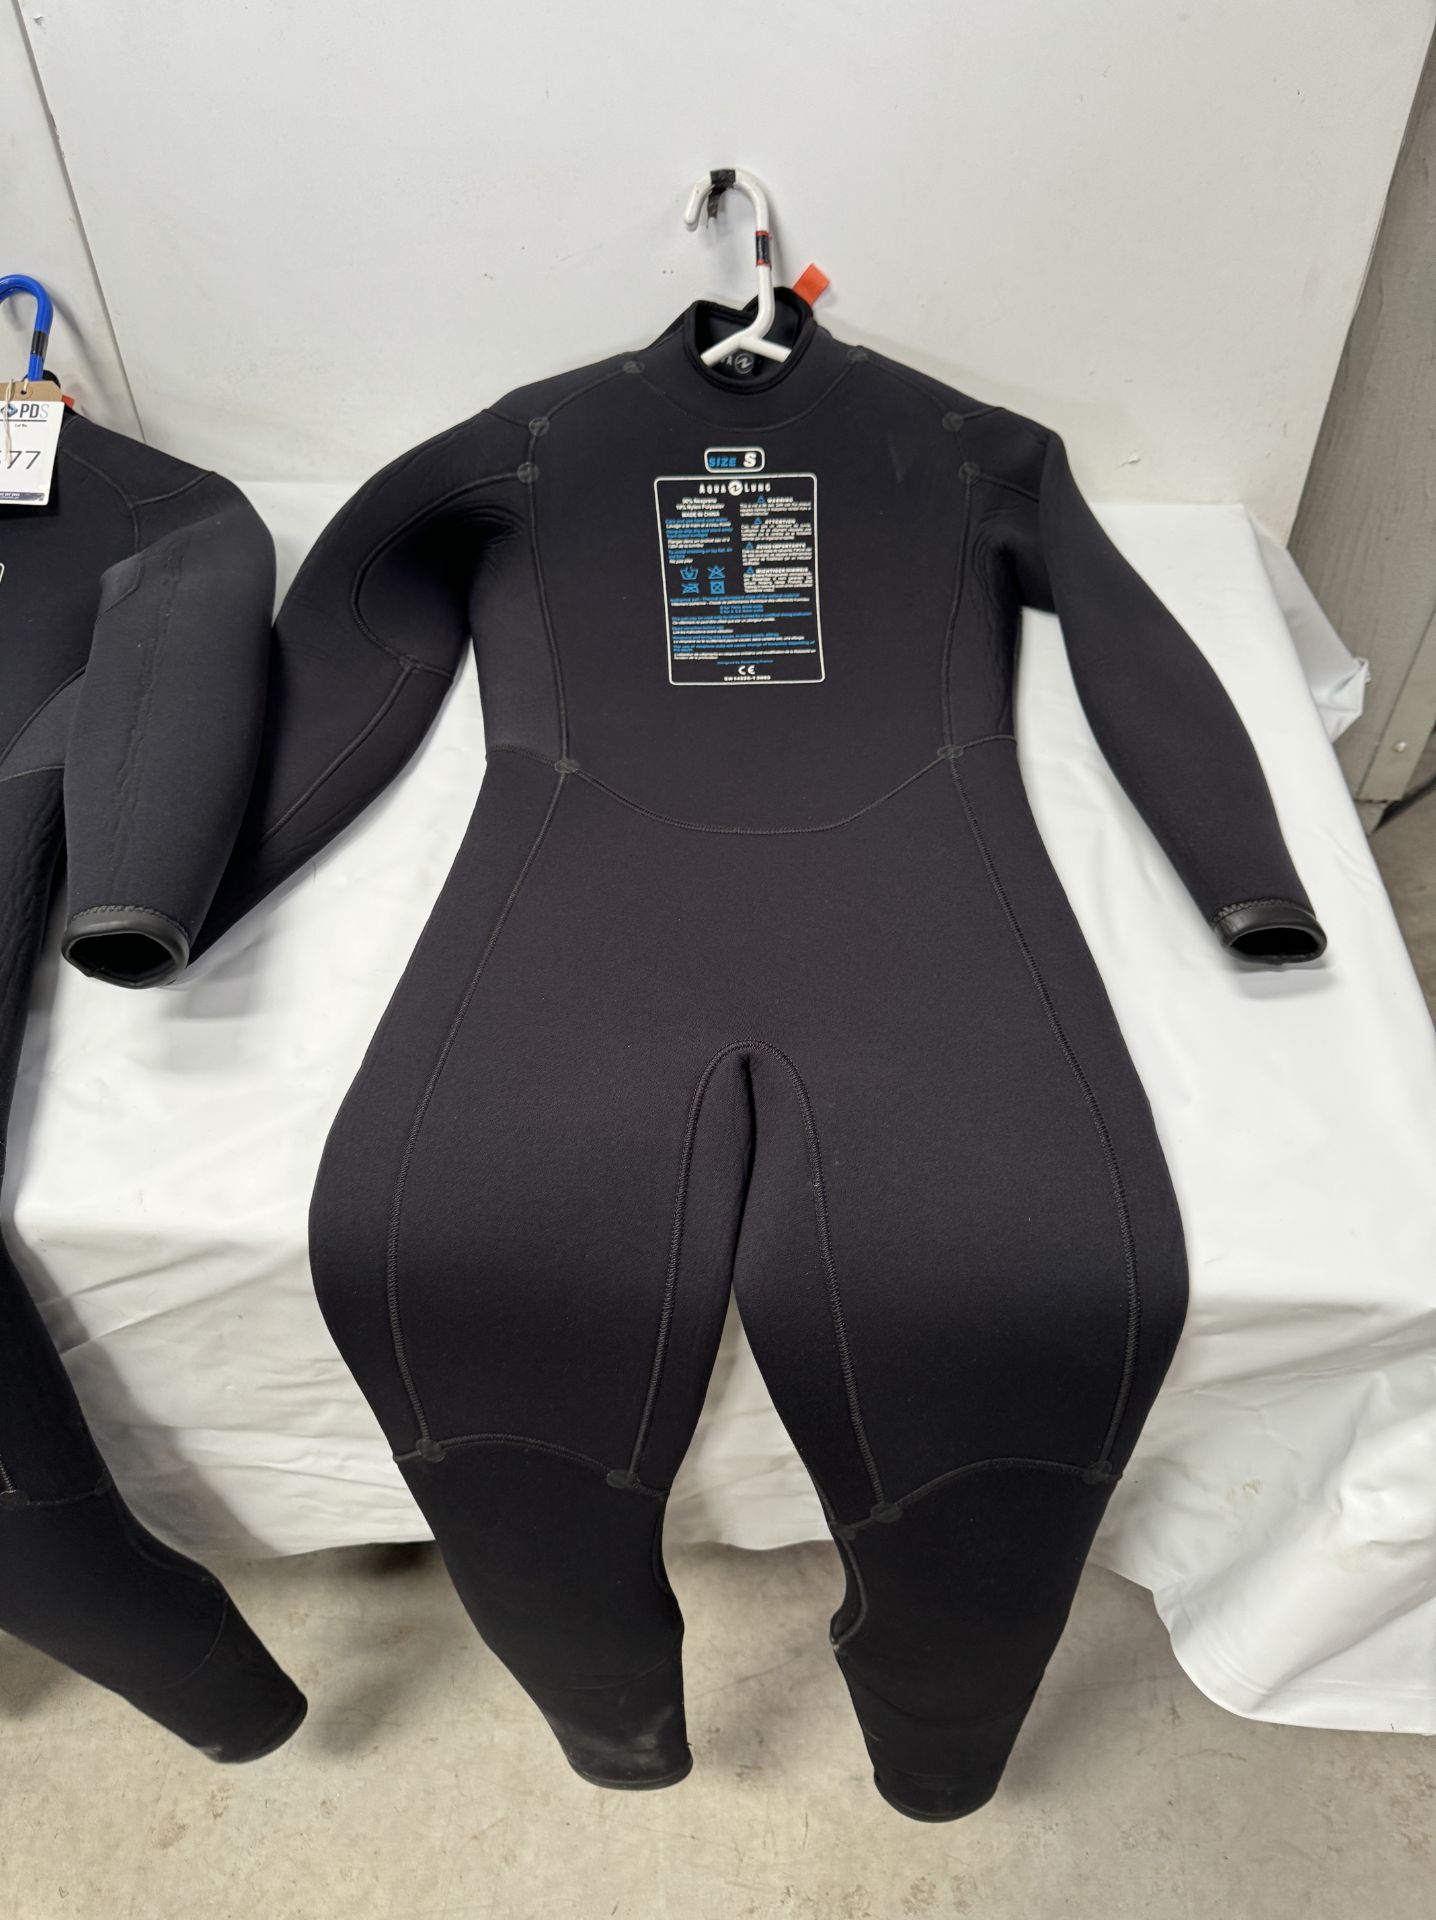 Three Aqualung Wetsuits, Size S (Location: Brentwood. Please Refer to General Notes) - Image 6 of 7